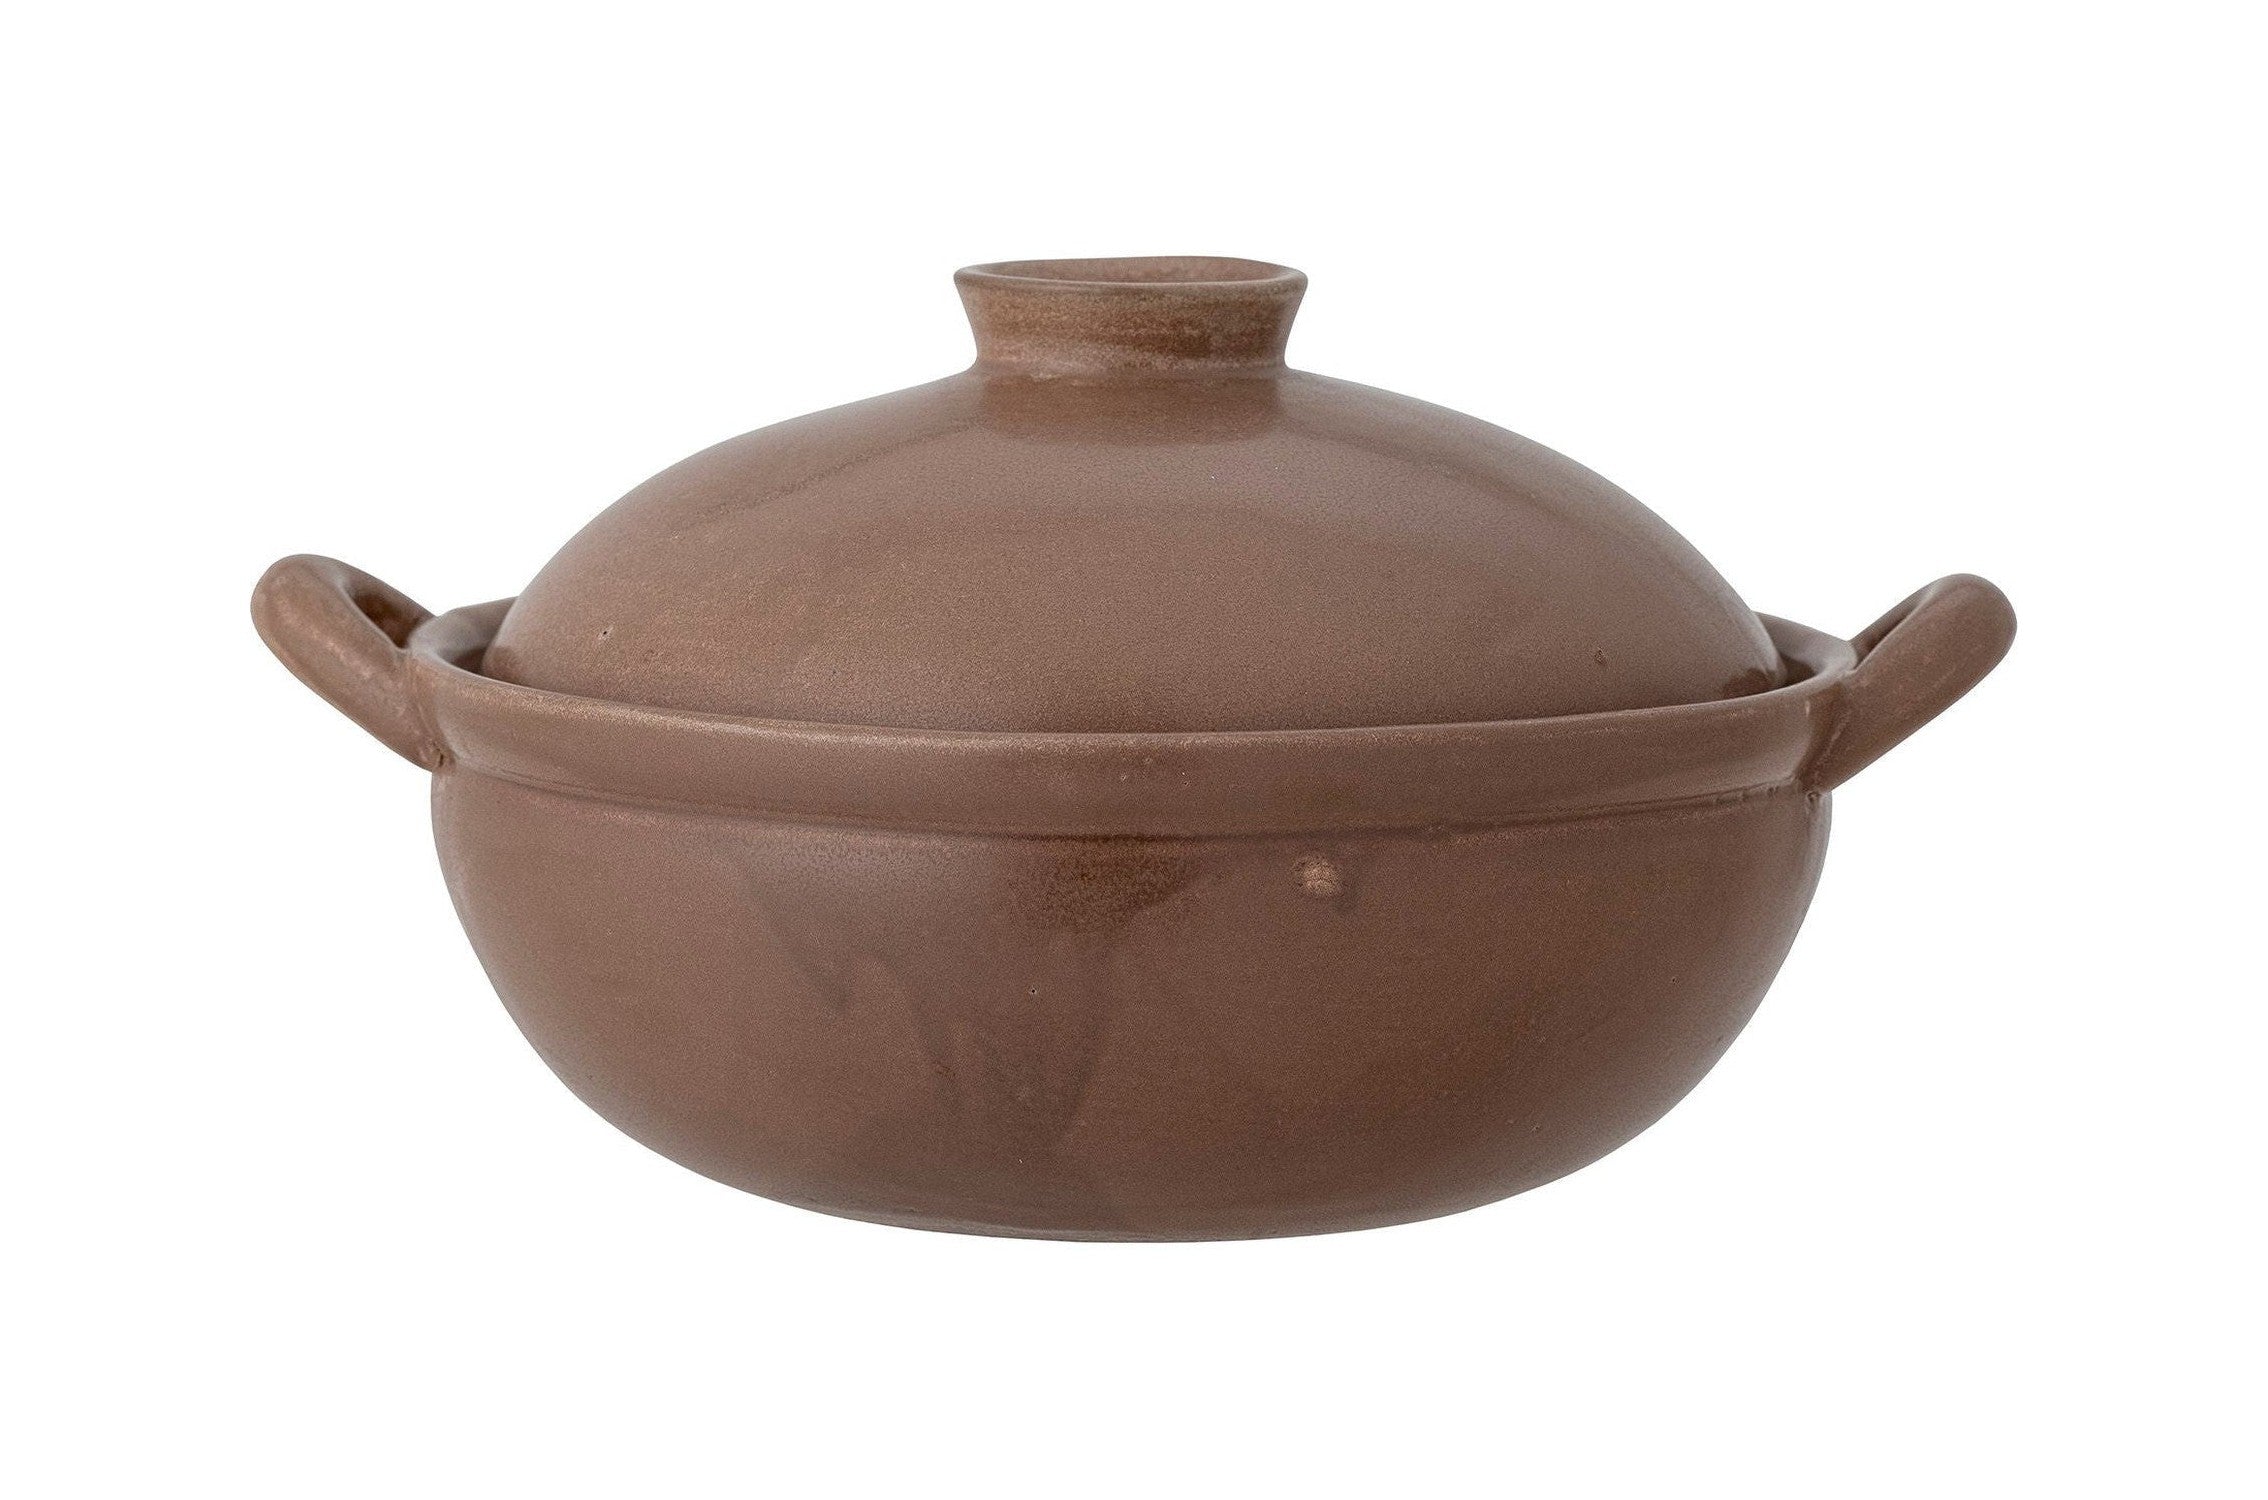 Creative Collection Jinnie Oven Dish w/Lid, Brown, Stoneware